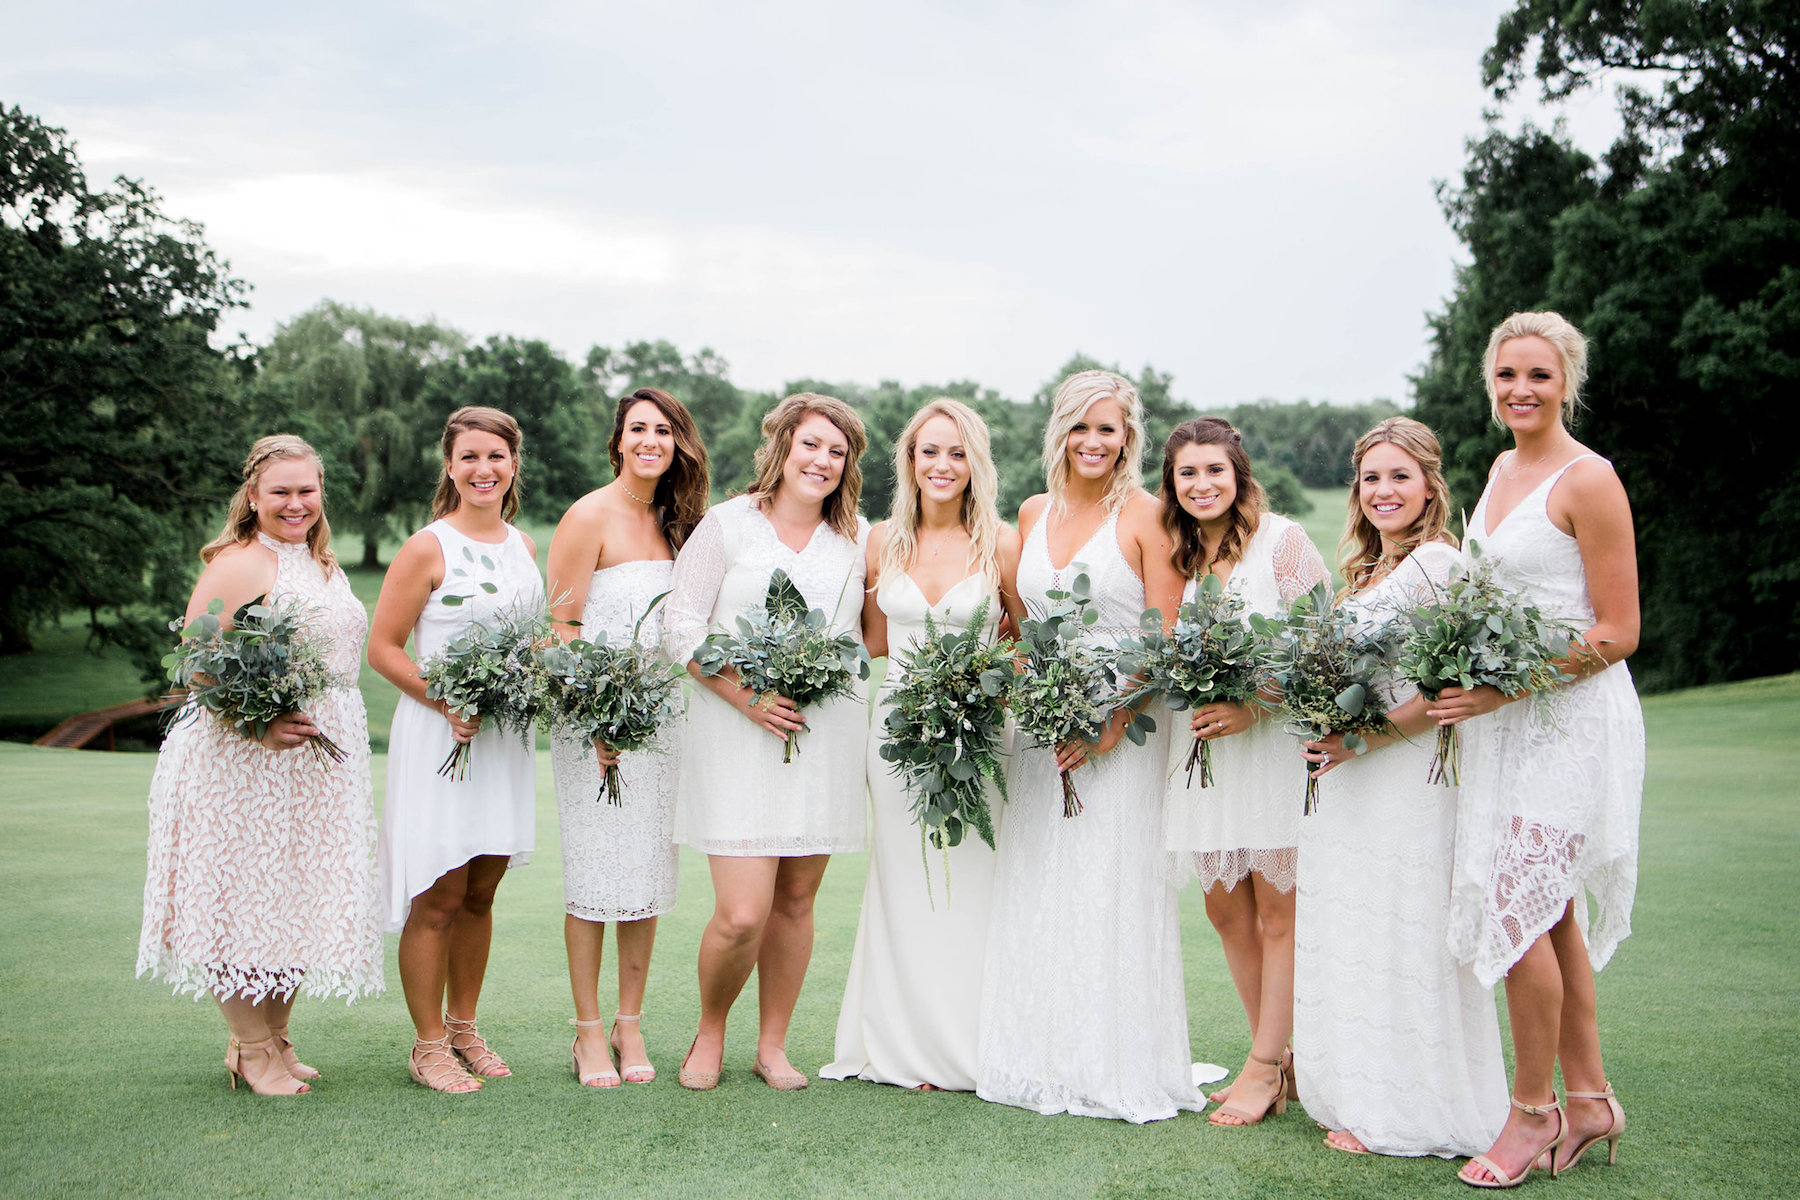 A Country Club Wedding with White Dresses